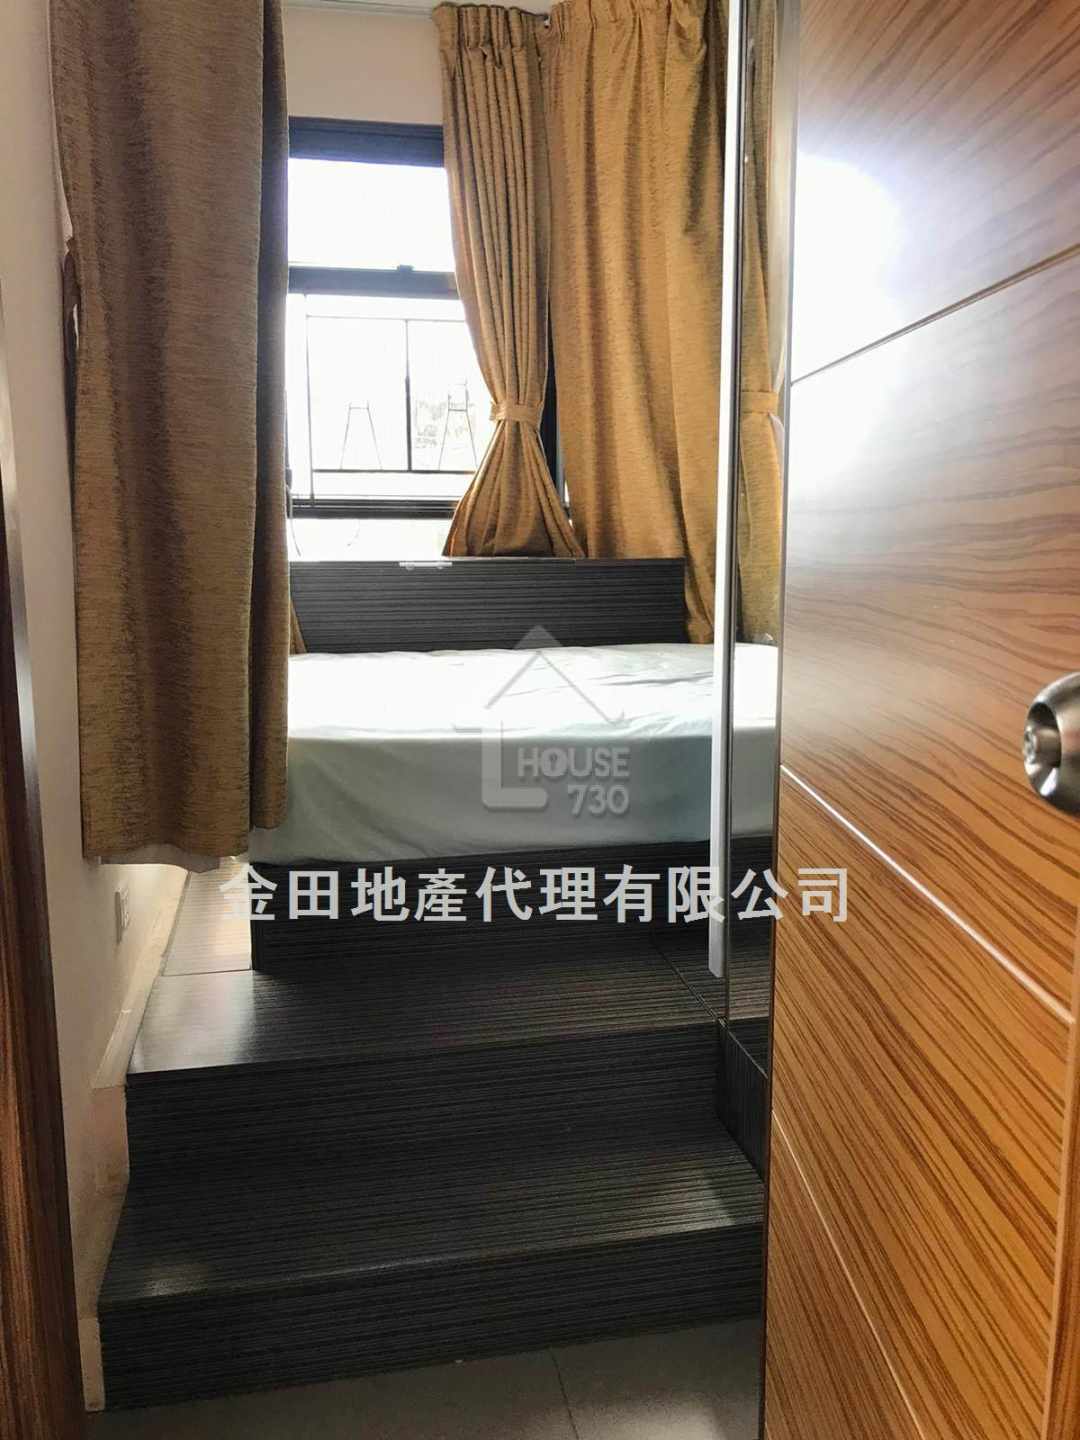 Tai Hang CHUANG'S-ON-THE-PARK Middle Floor Bedroom 1 House730-6281754